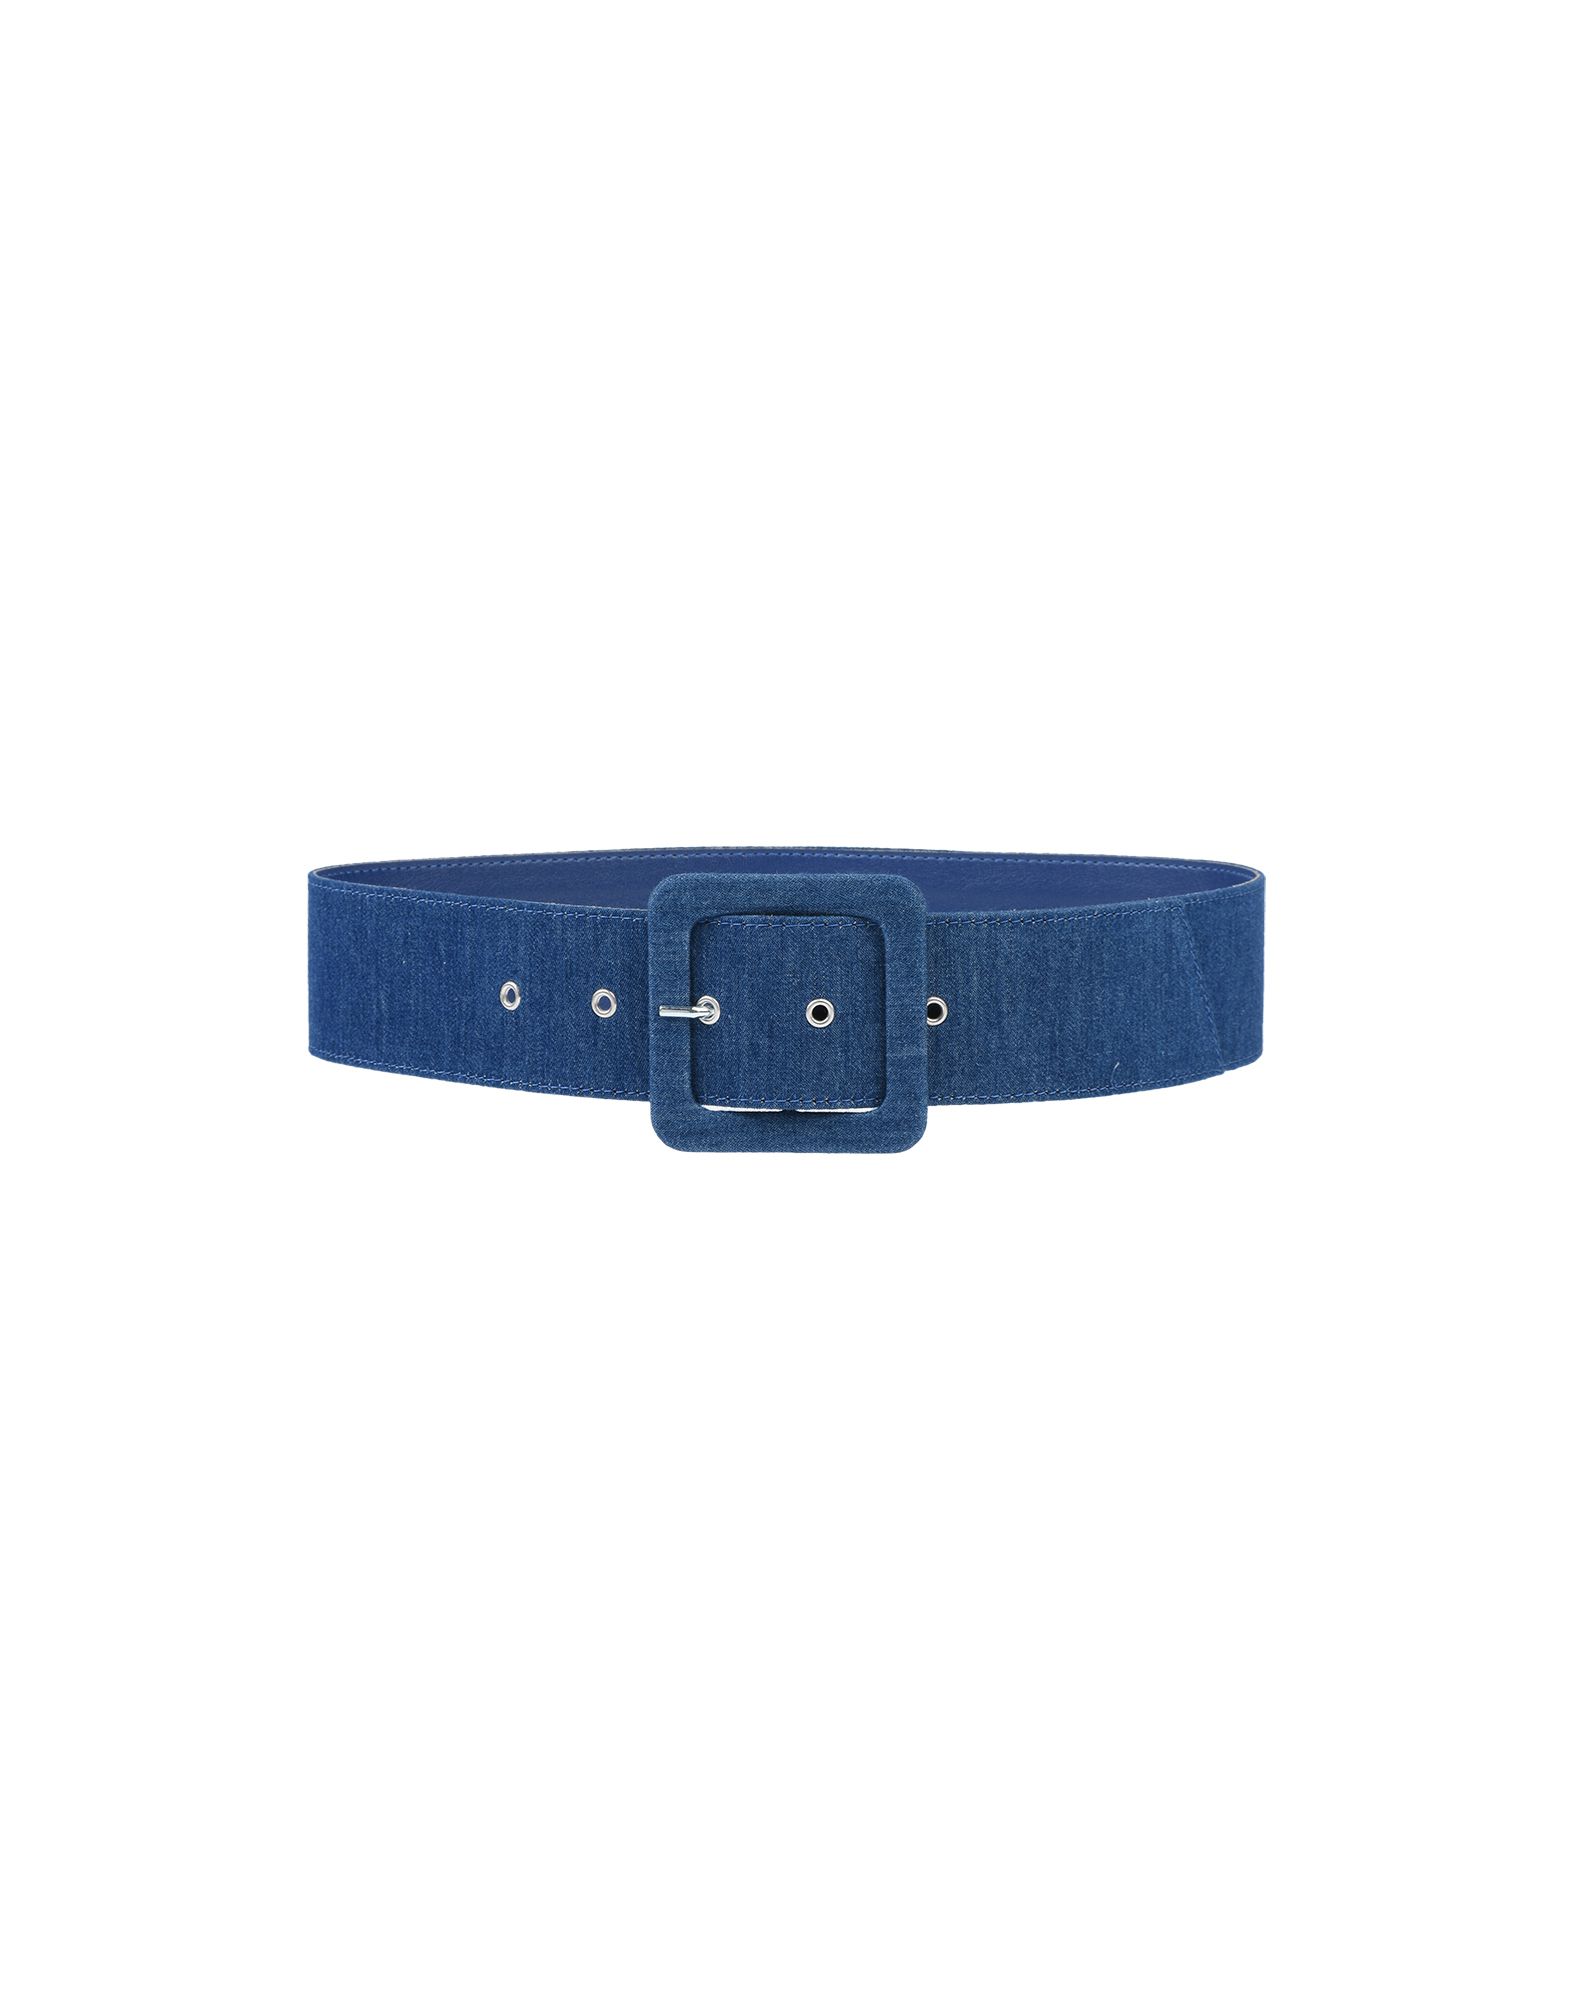 Anna Rachele Jeans Collection Belts In Blue